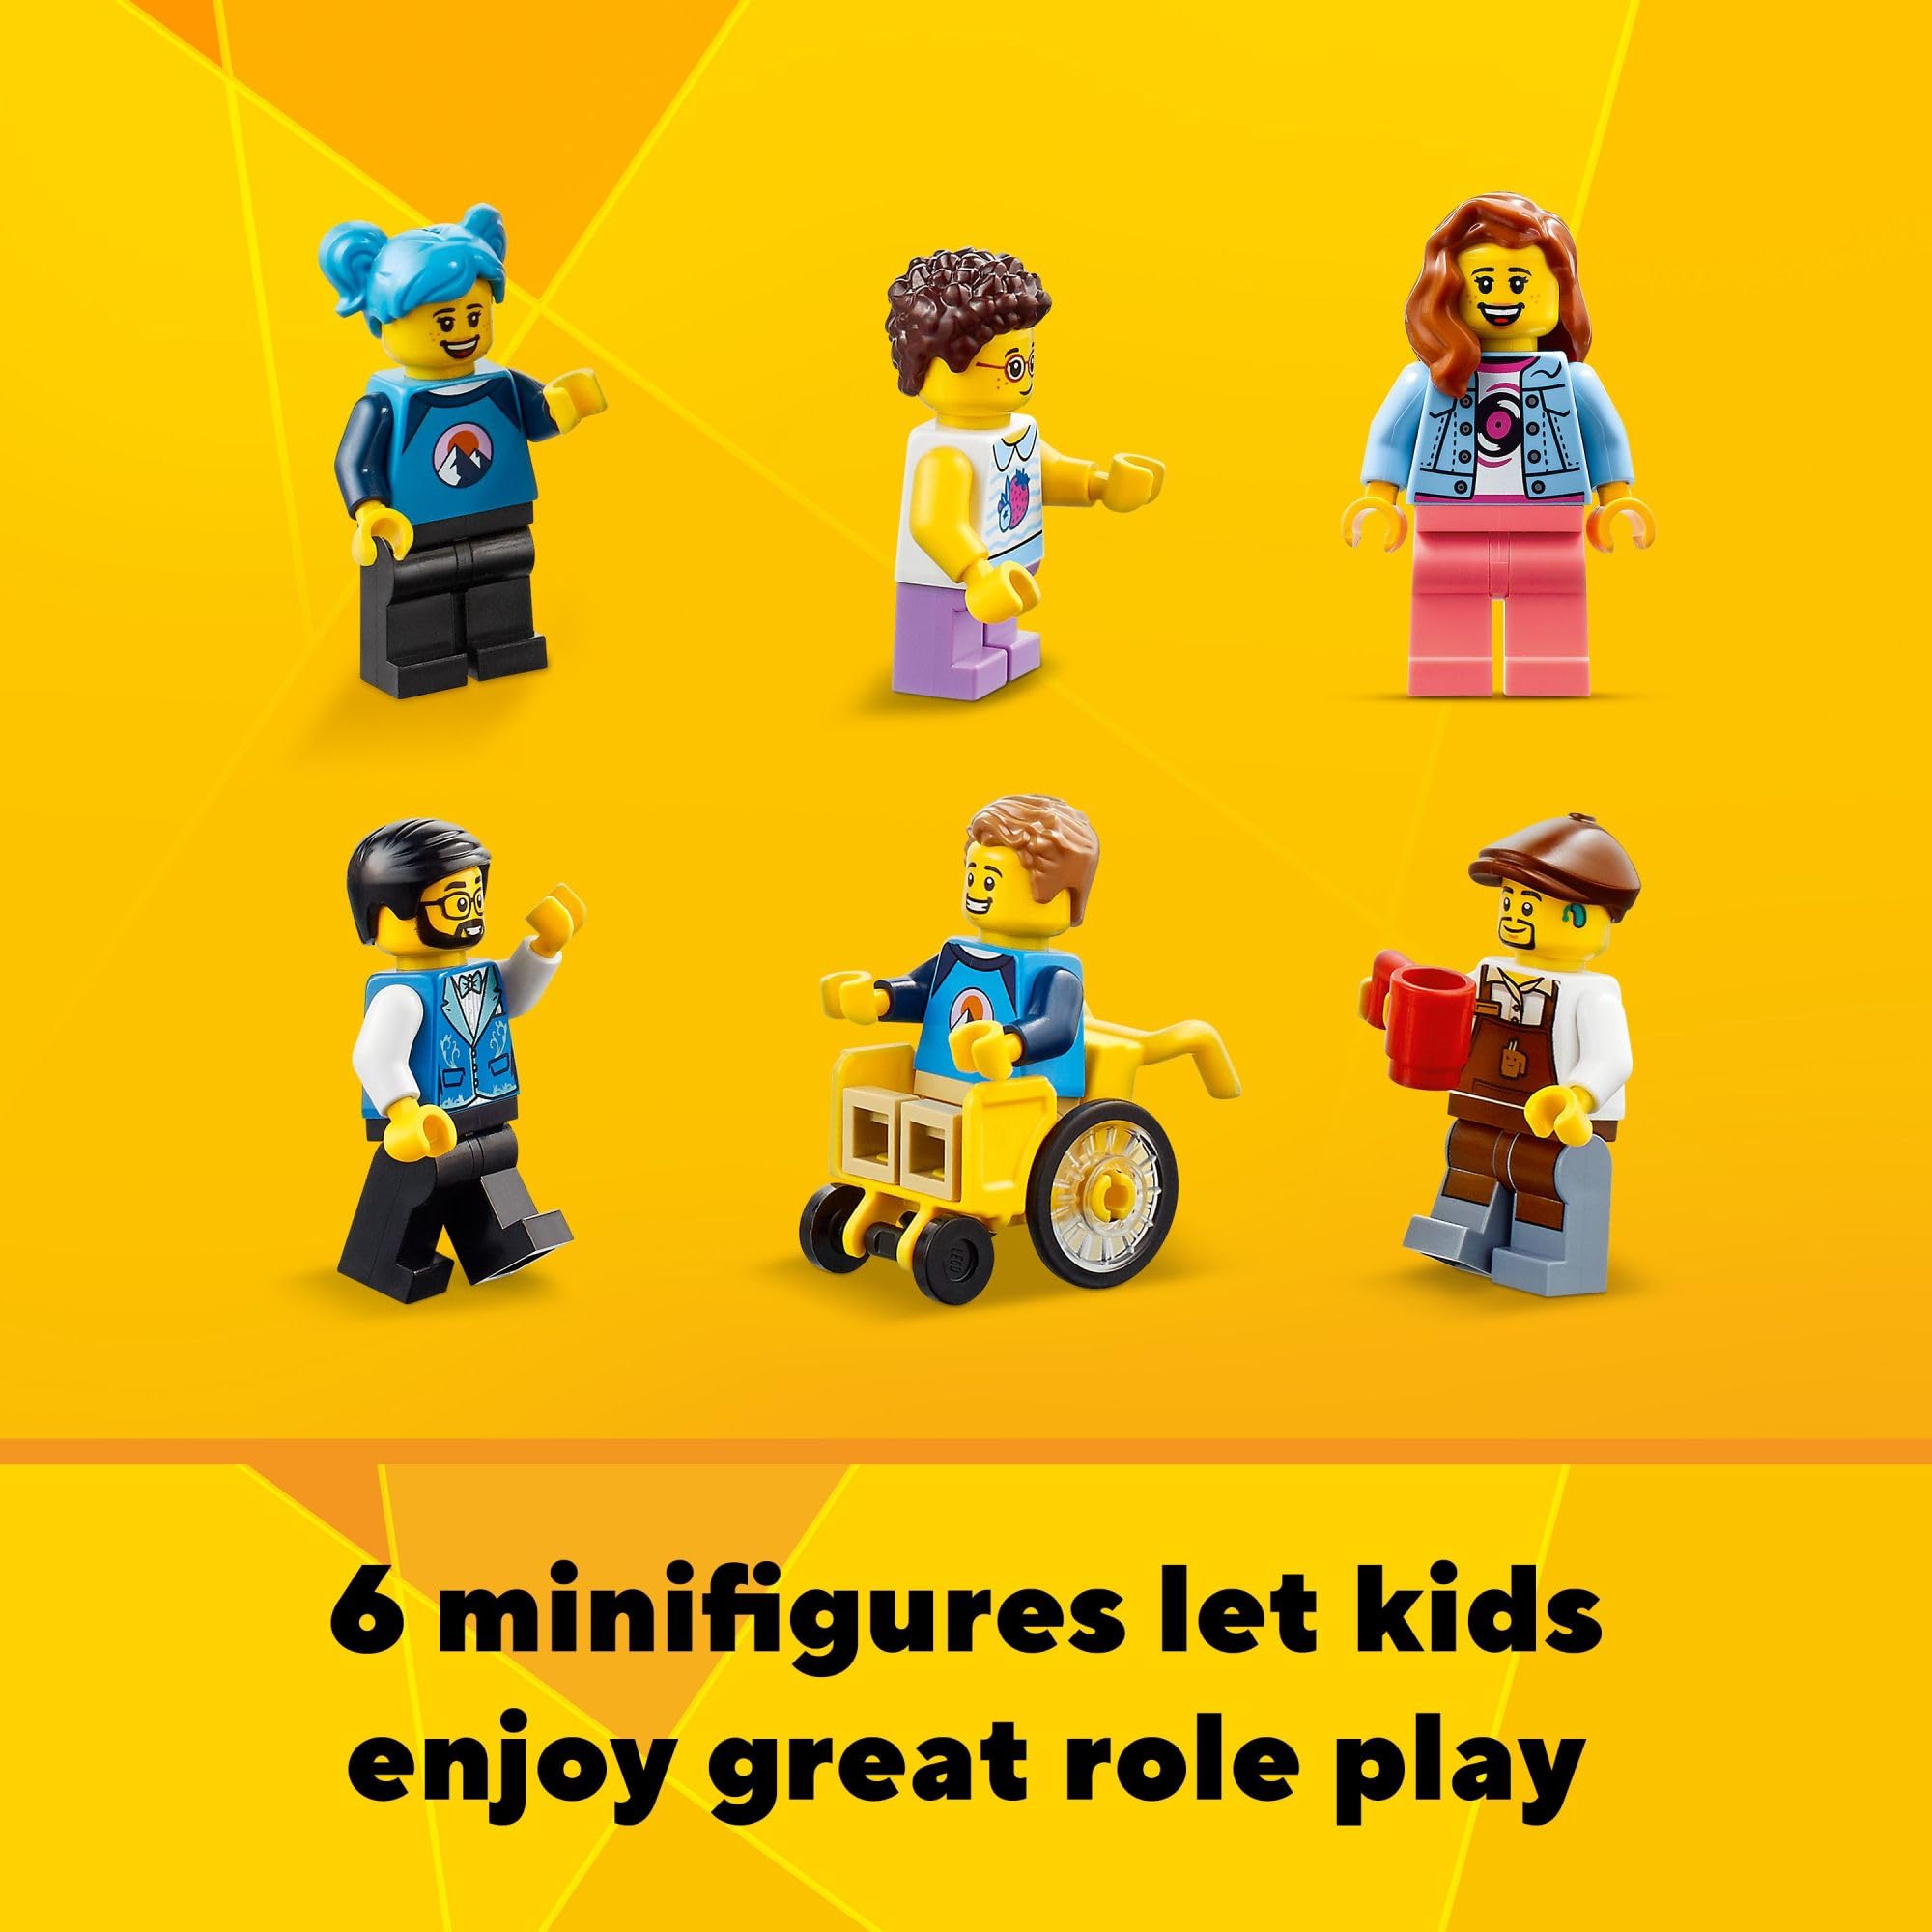 LEGO Creator Main Street 31141 Building Toy Set, 3 in 1 Features a Toy City Art Deco Building, Market Street Hotel, Café Music Store and 6 Minifigures, Endless Play Possibilities for Boys and Girls